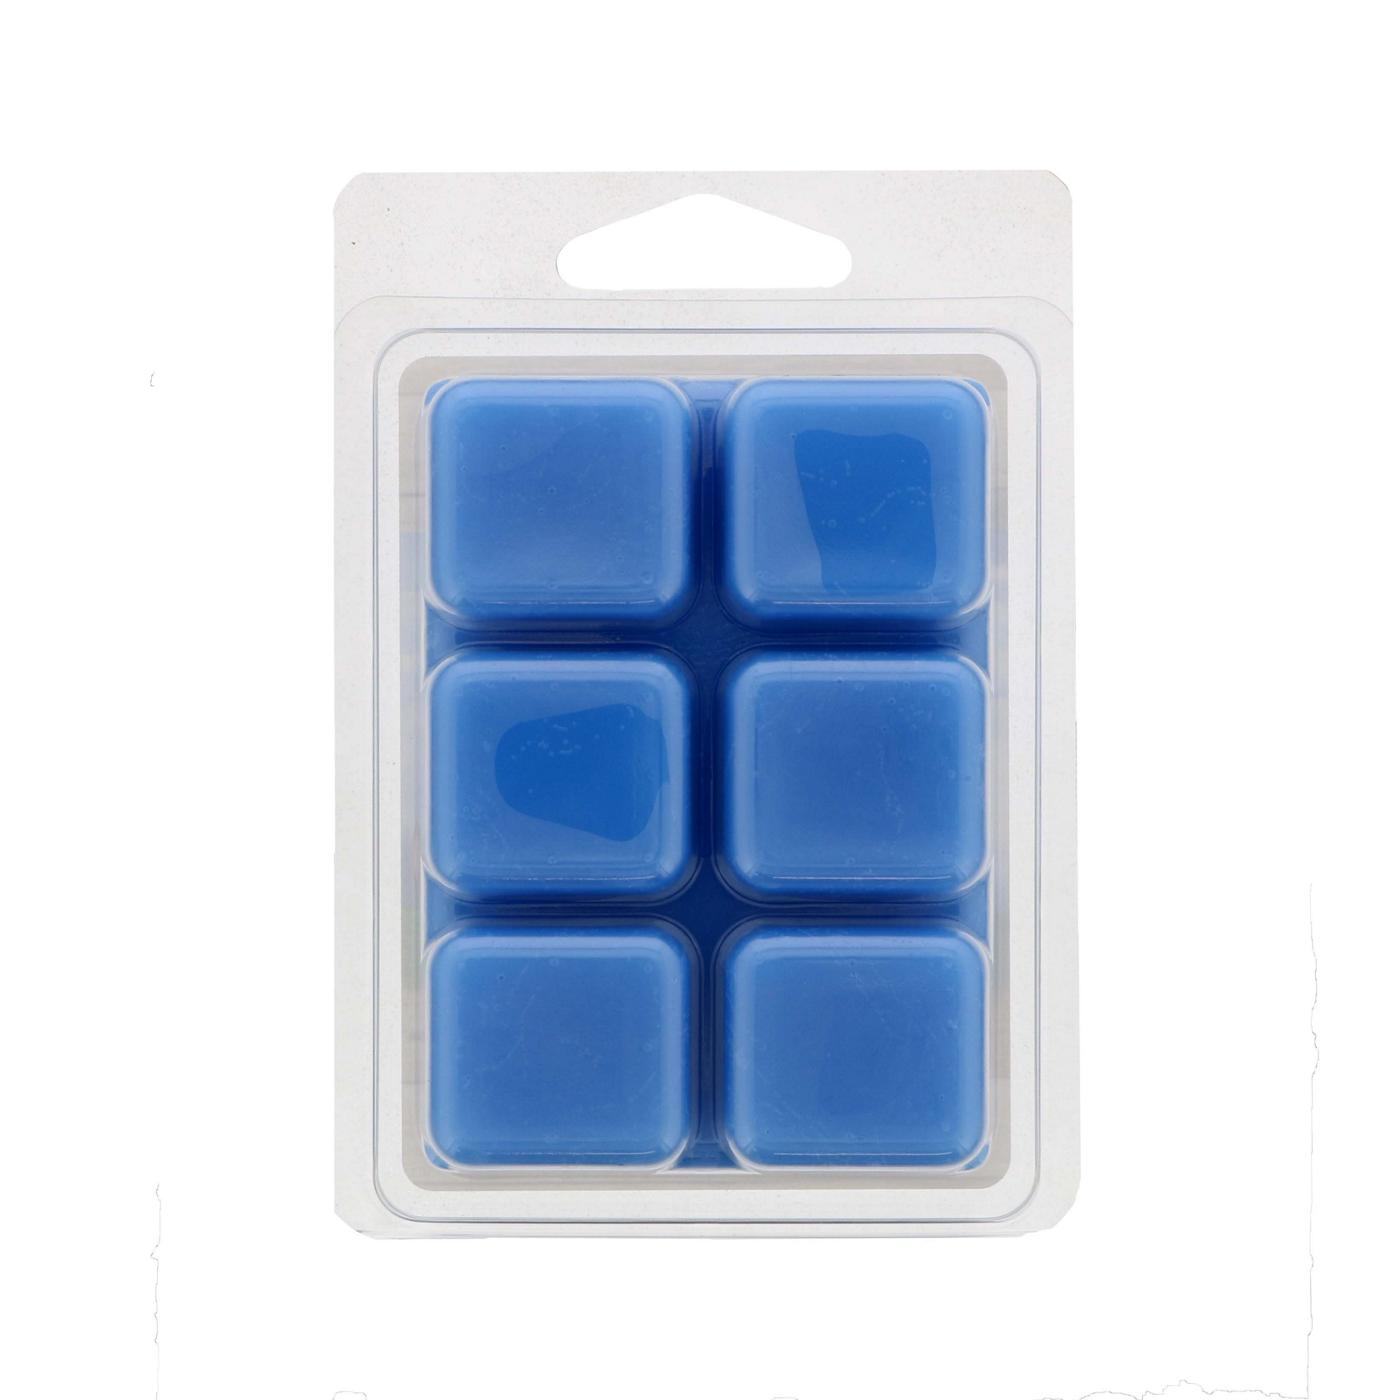 ScentSationals Relax Lavender & Chamomile Scented Wax Cubes, 6 Ct - Shop  Scented Oils & Wax at H-E-B